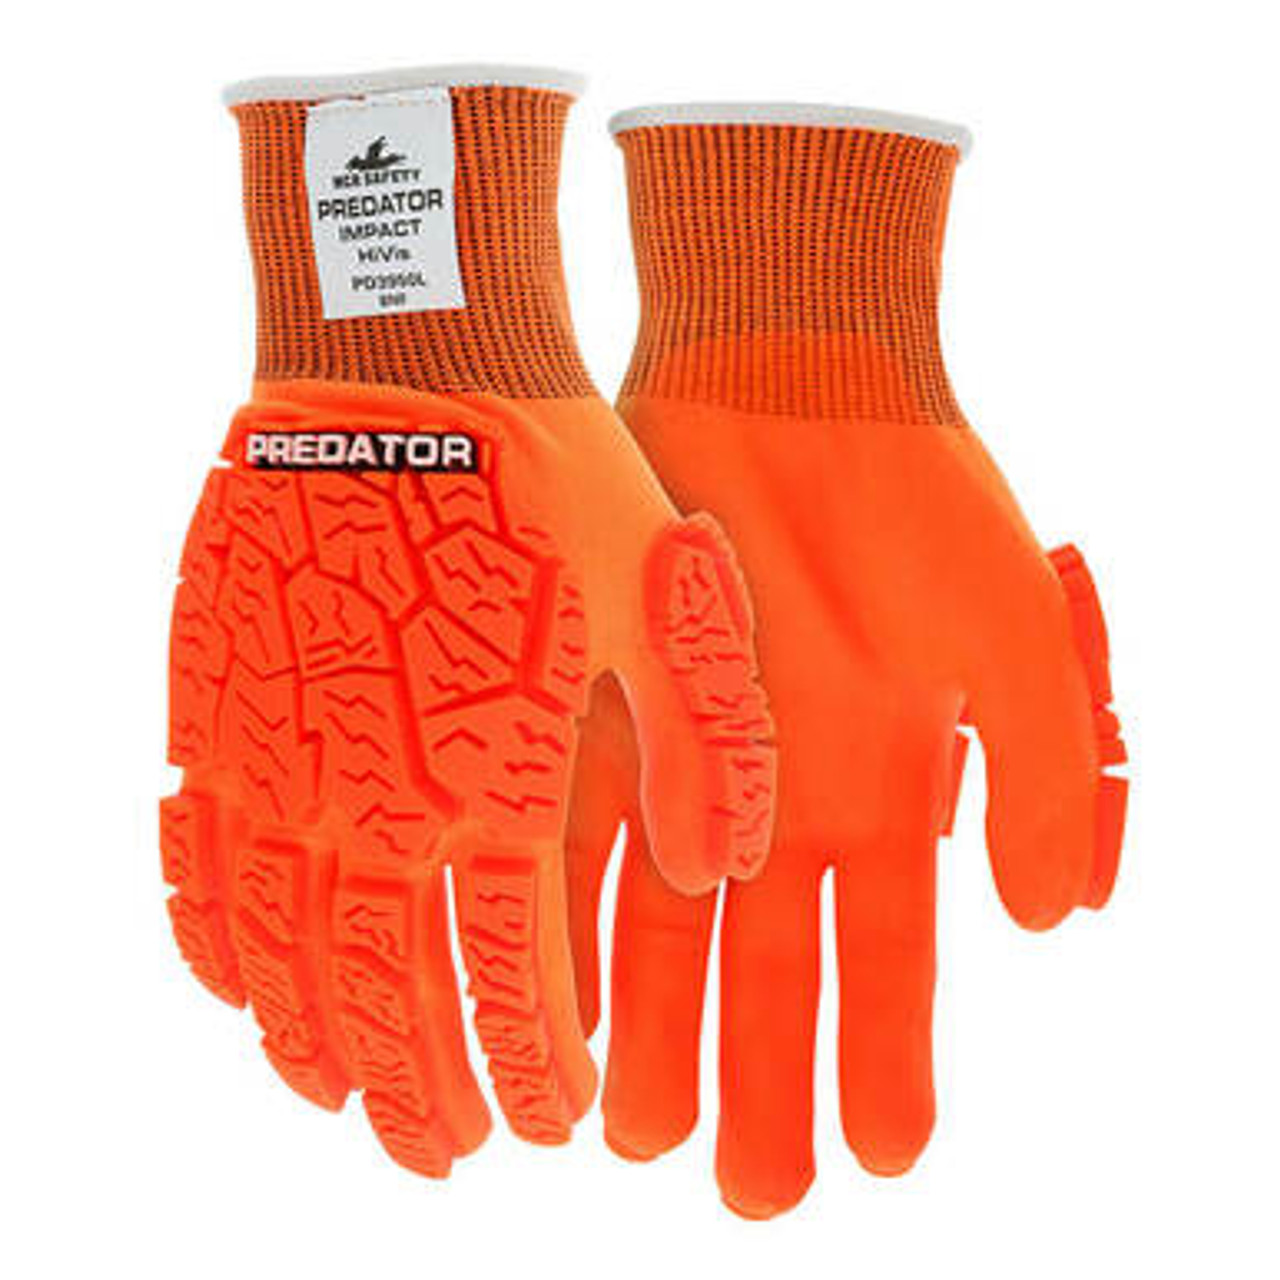 Mechanix Construction Gloves for Work - Pro Tool Reviews